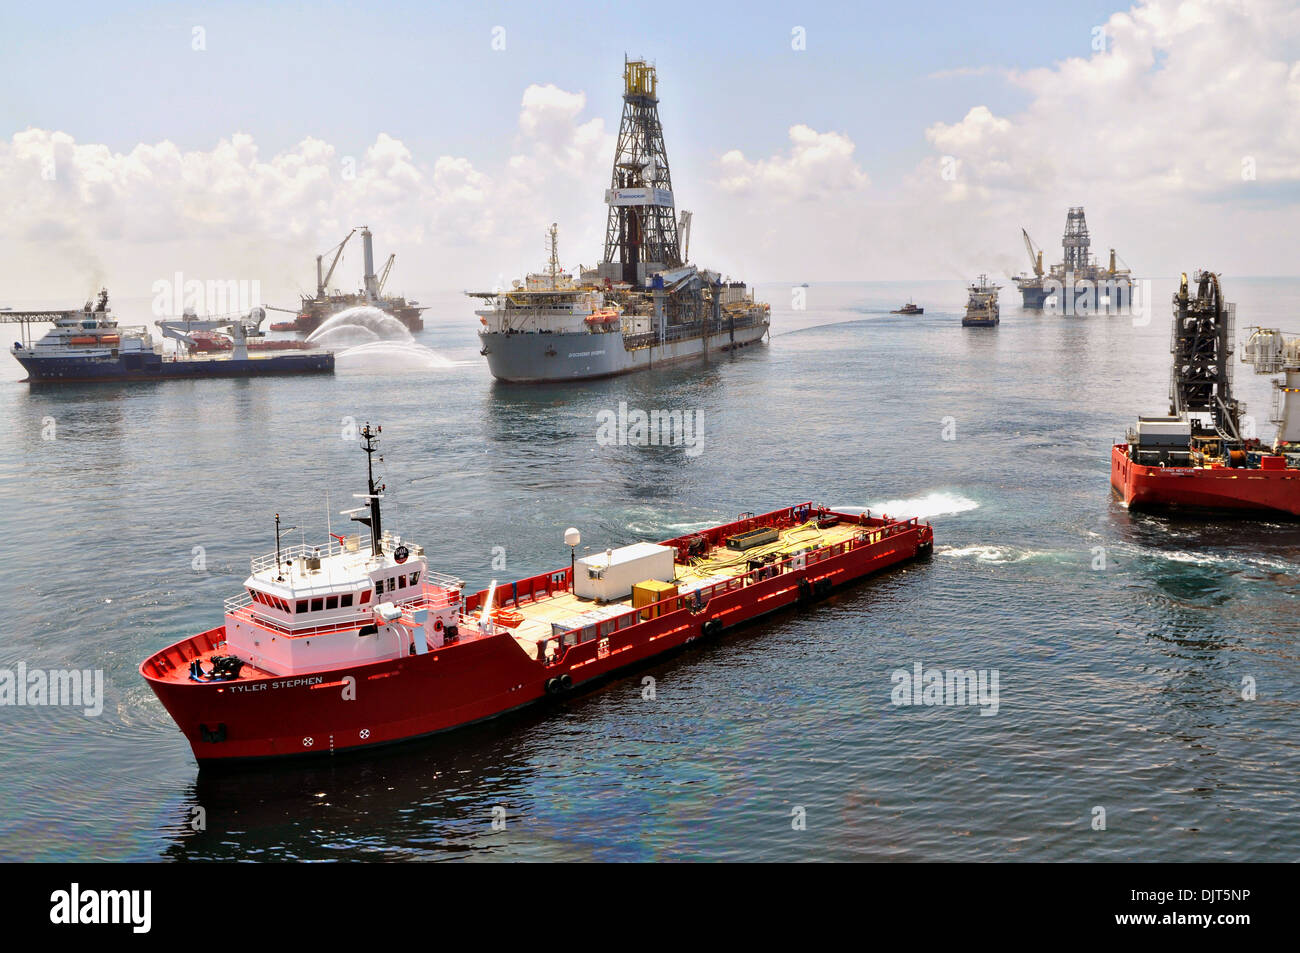 Ships and drilling rigs surrounding the Discoverer Enterprise as it recovers oil from the Deepwater Horizon drill site June 15, 2010 in the Gulf of Mexico. The spill considered the largest accidental marine oil spill in the history of the petroleum industry. Stock Photo